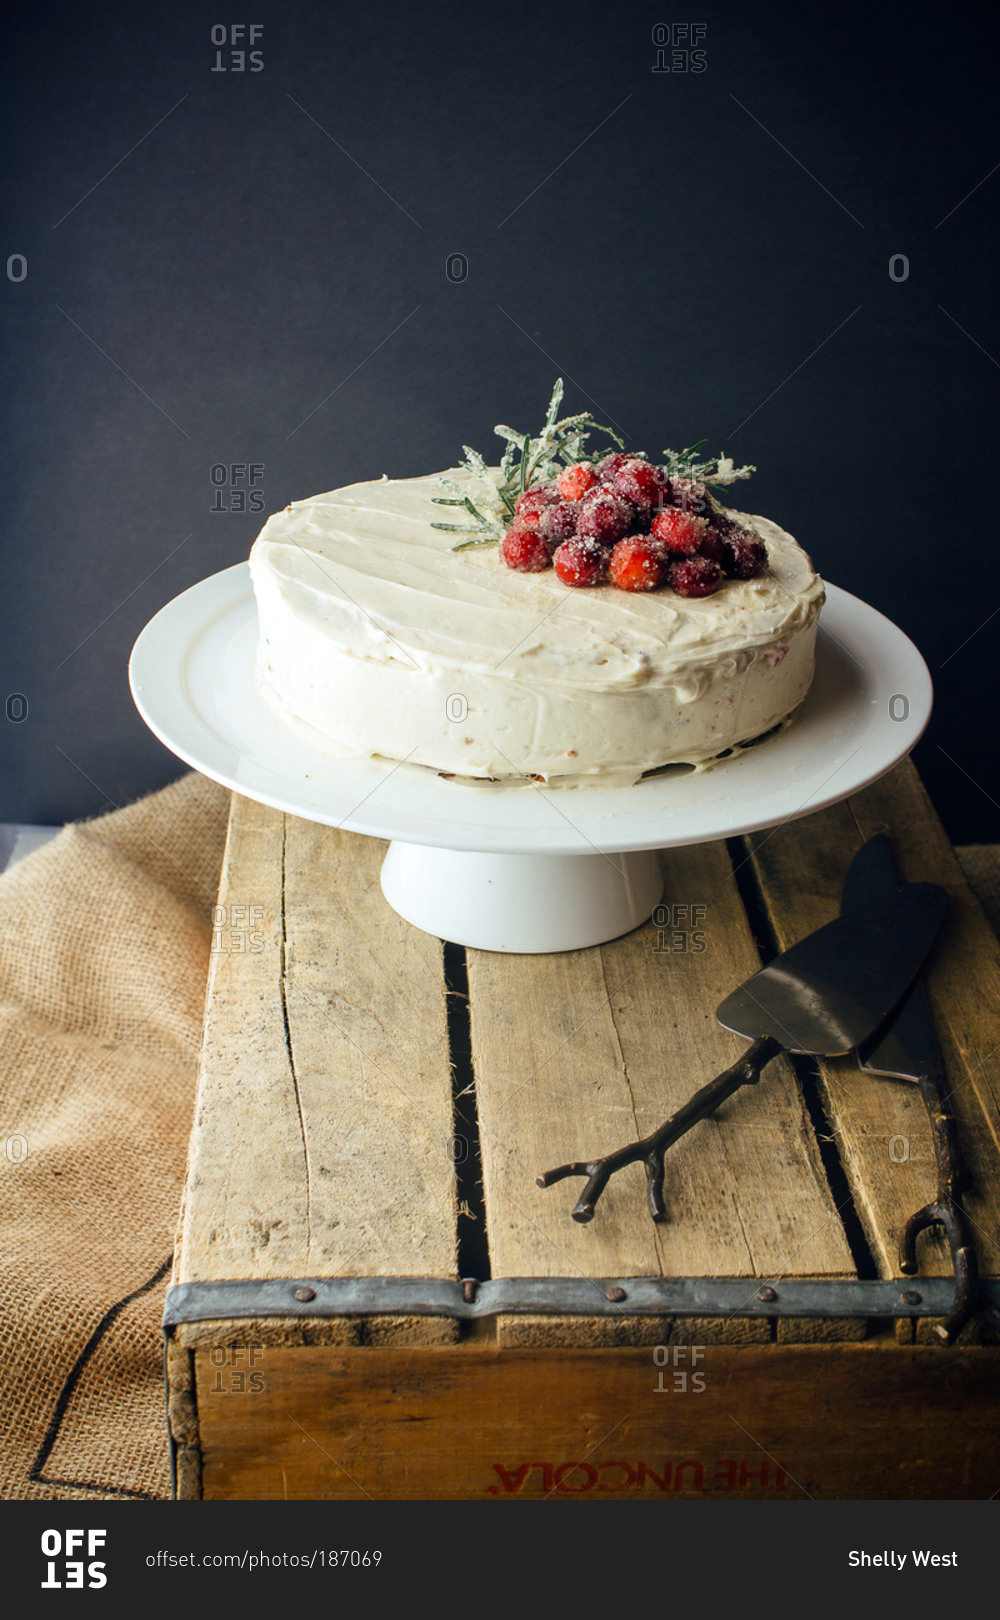 Chocolate cake with white frosting and candied rosemary and cranberries with black background